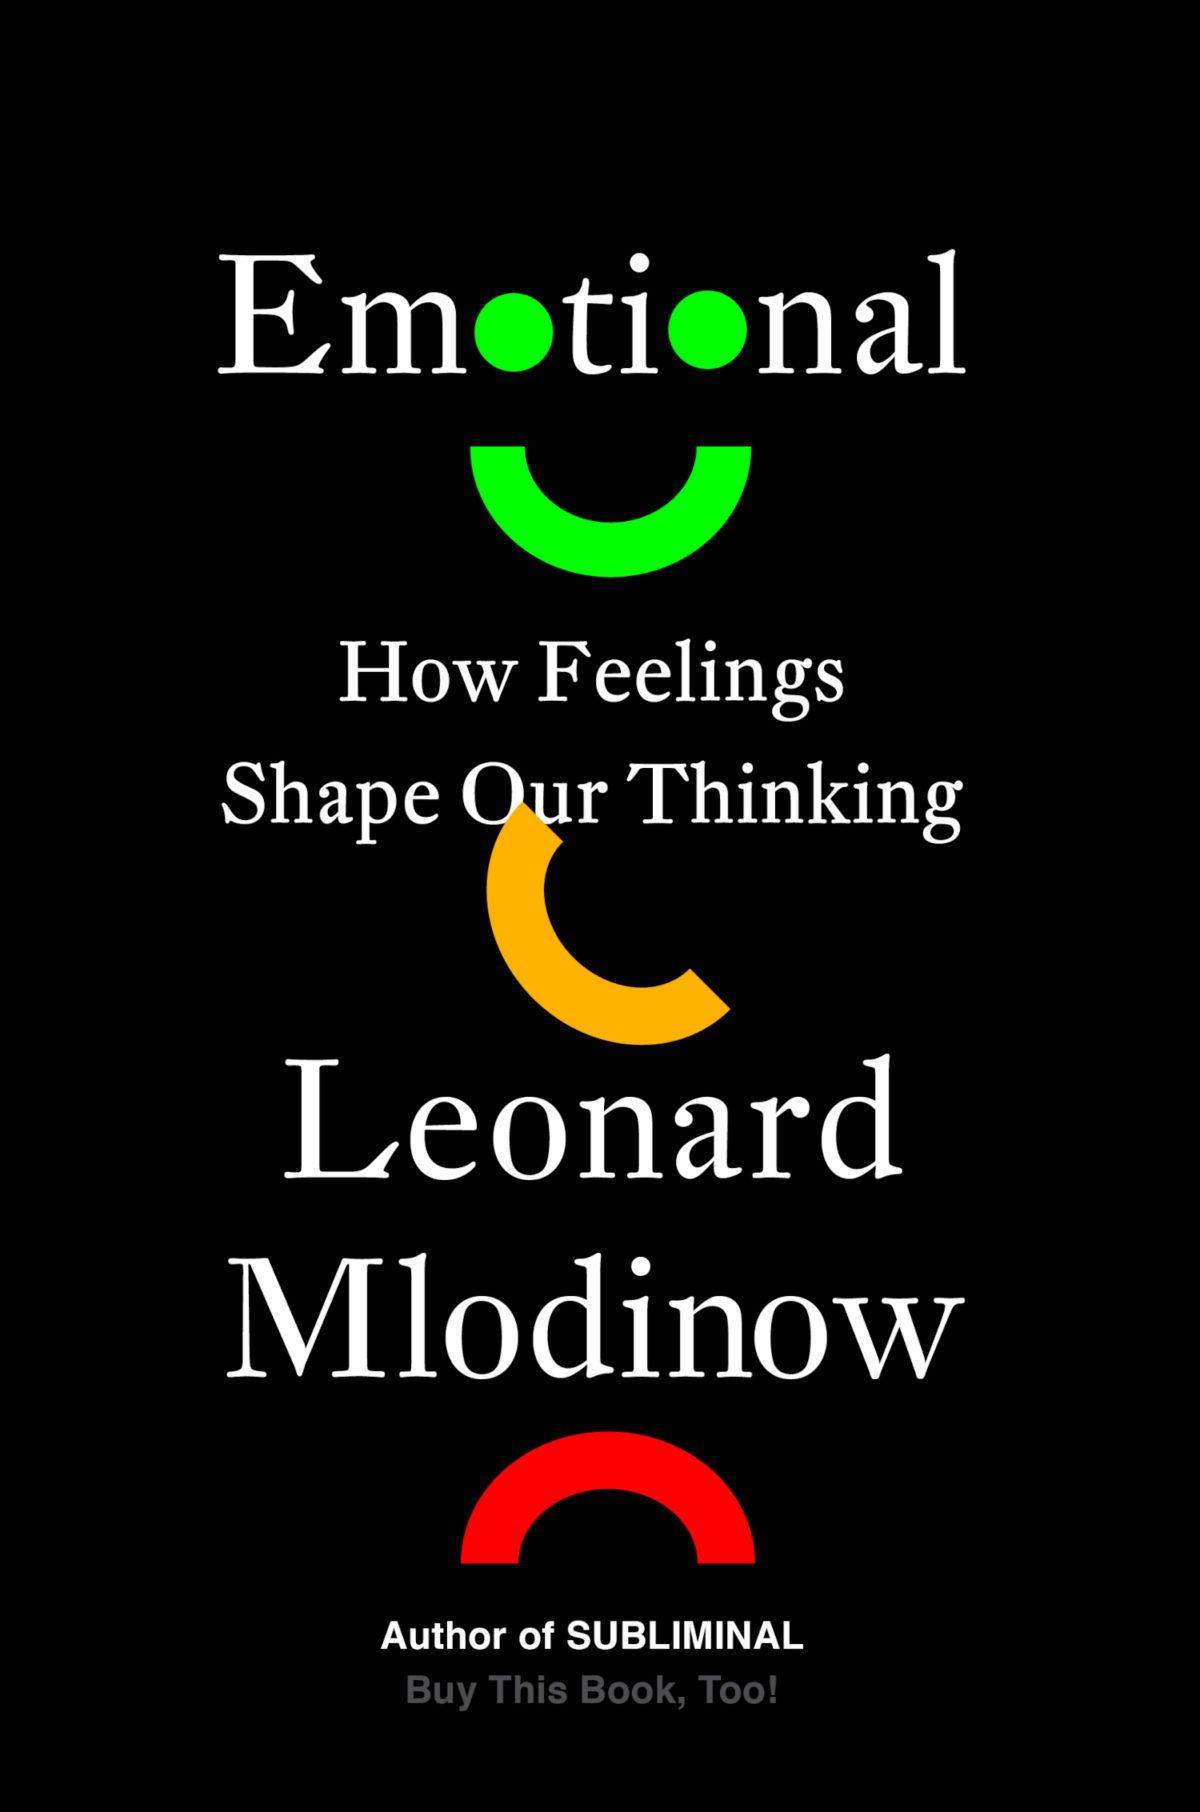 Book Review: Why Our Emotions Are So Powerful 2